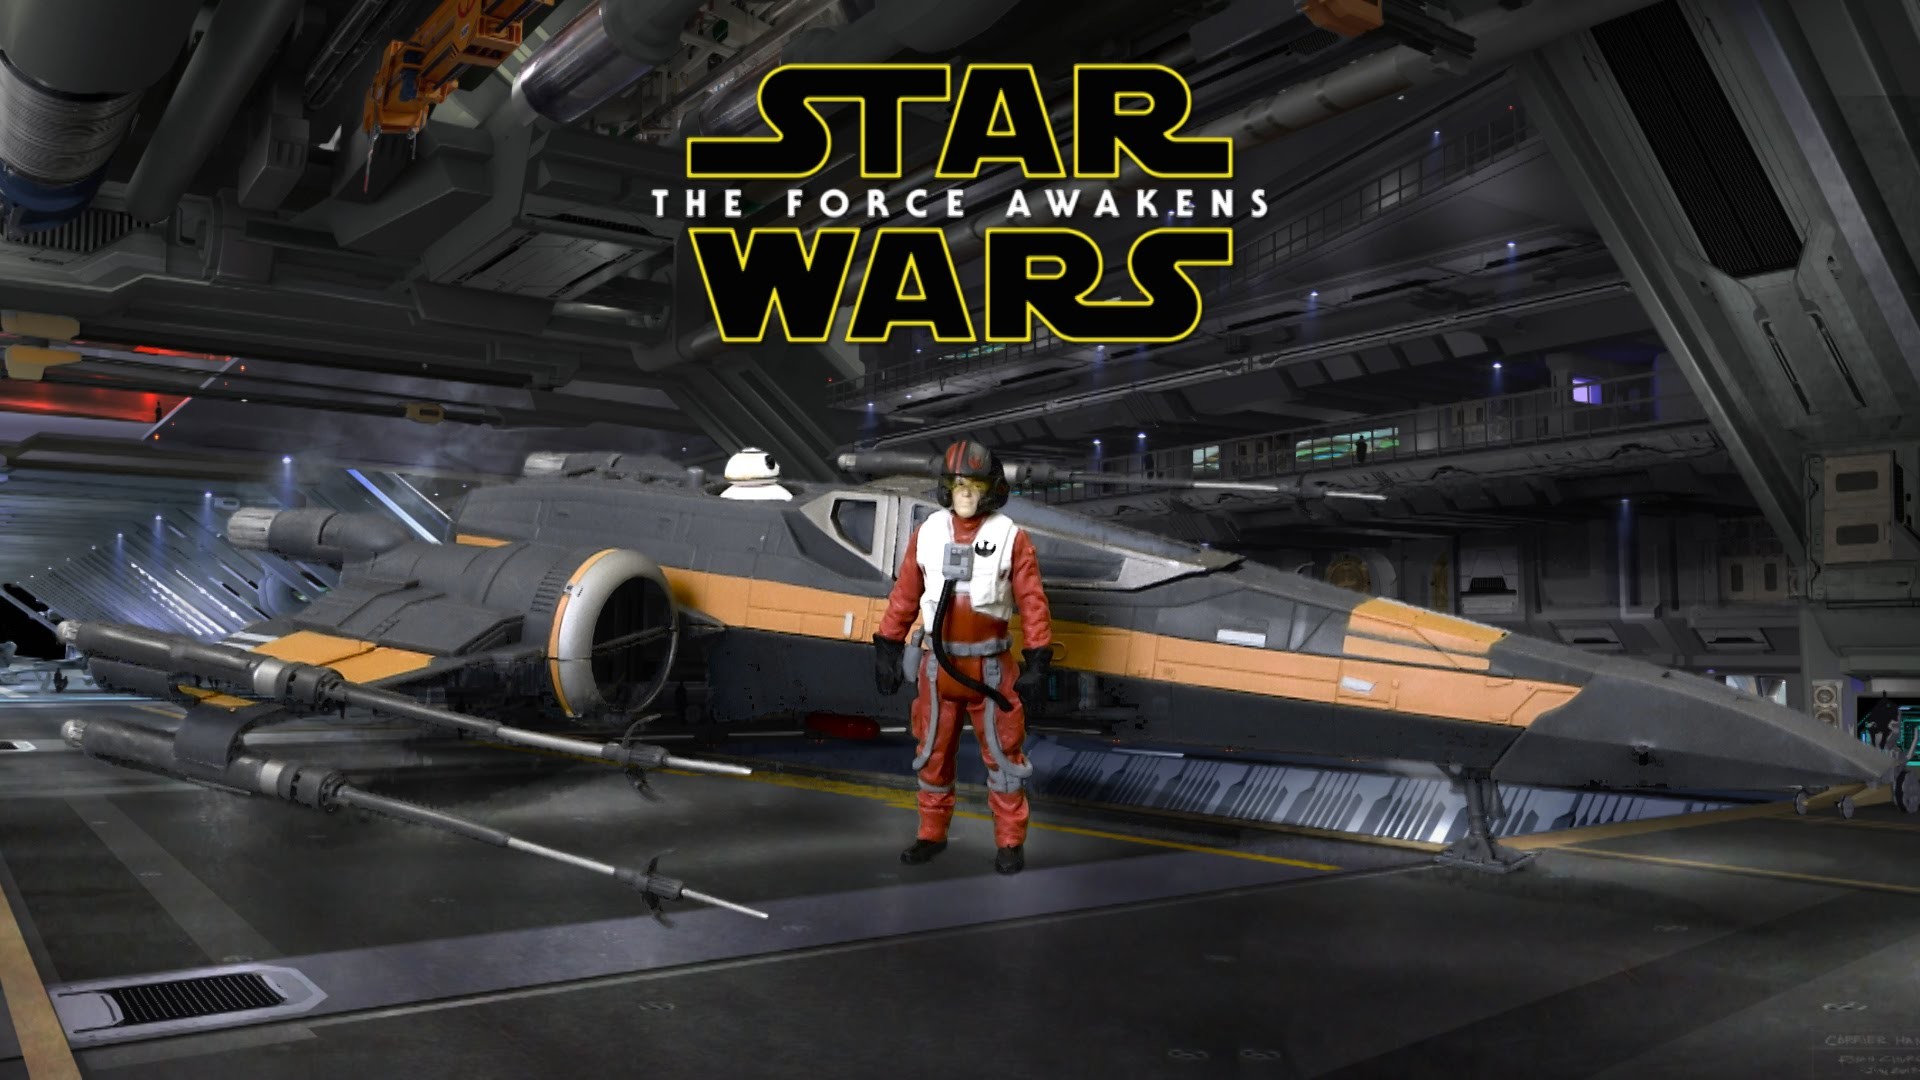 Star Wars The Force Awakens Poe's X-Wing Fighter with Poe Dameron Figure  from Hasbro – YouTube